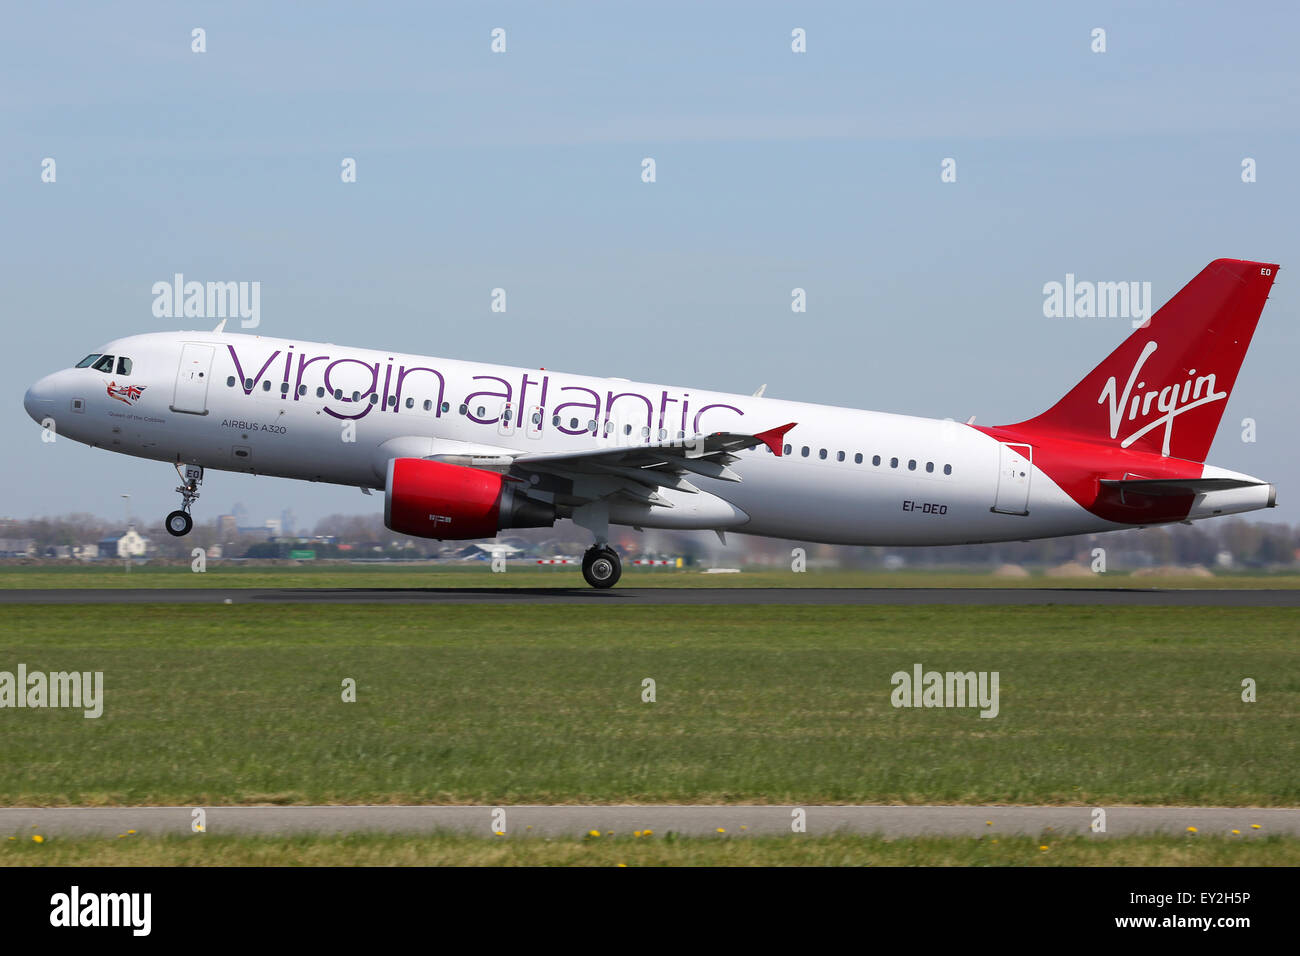 Amsterdam, Netherlands - April 21, 2015: A Virgin Atlantic Airbus A320 with the registration EI-DEO taking off from Amsterdam Ai Stock Photo